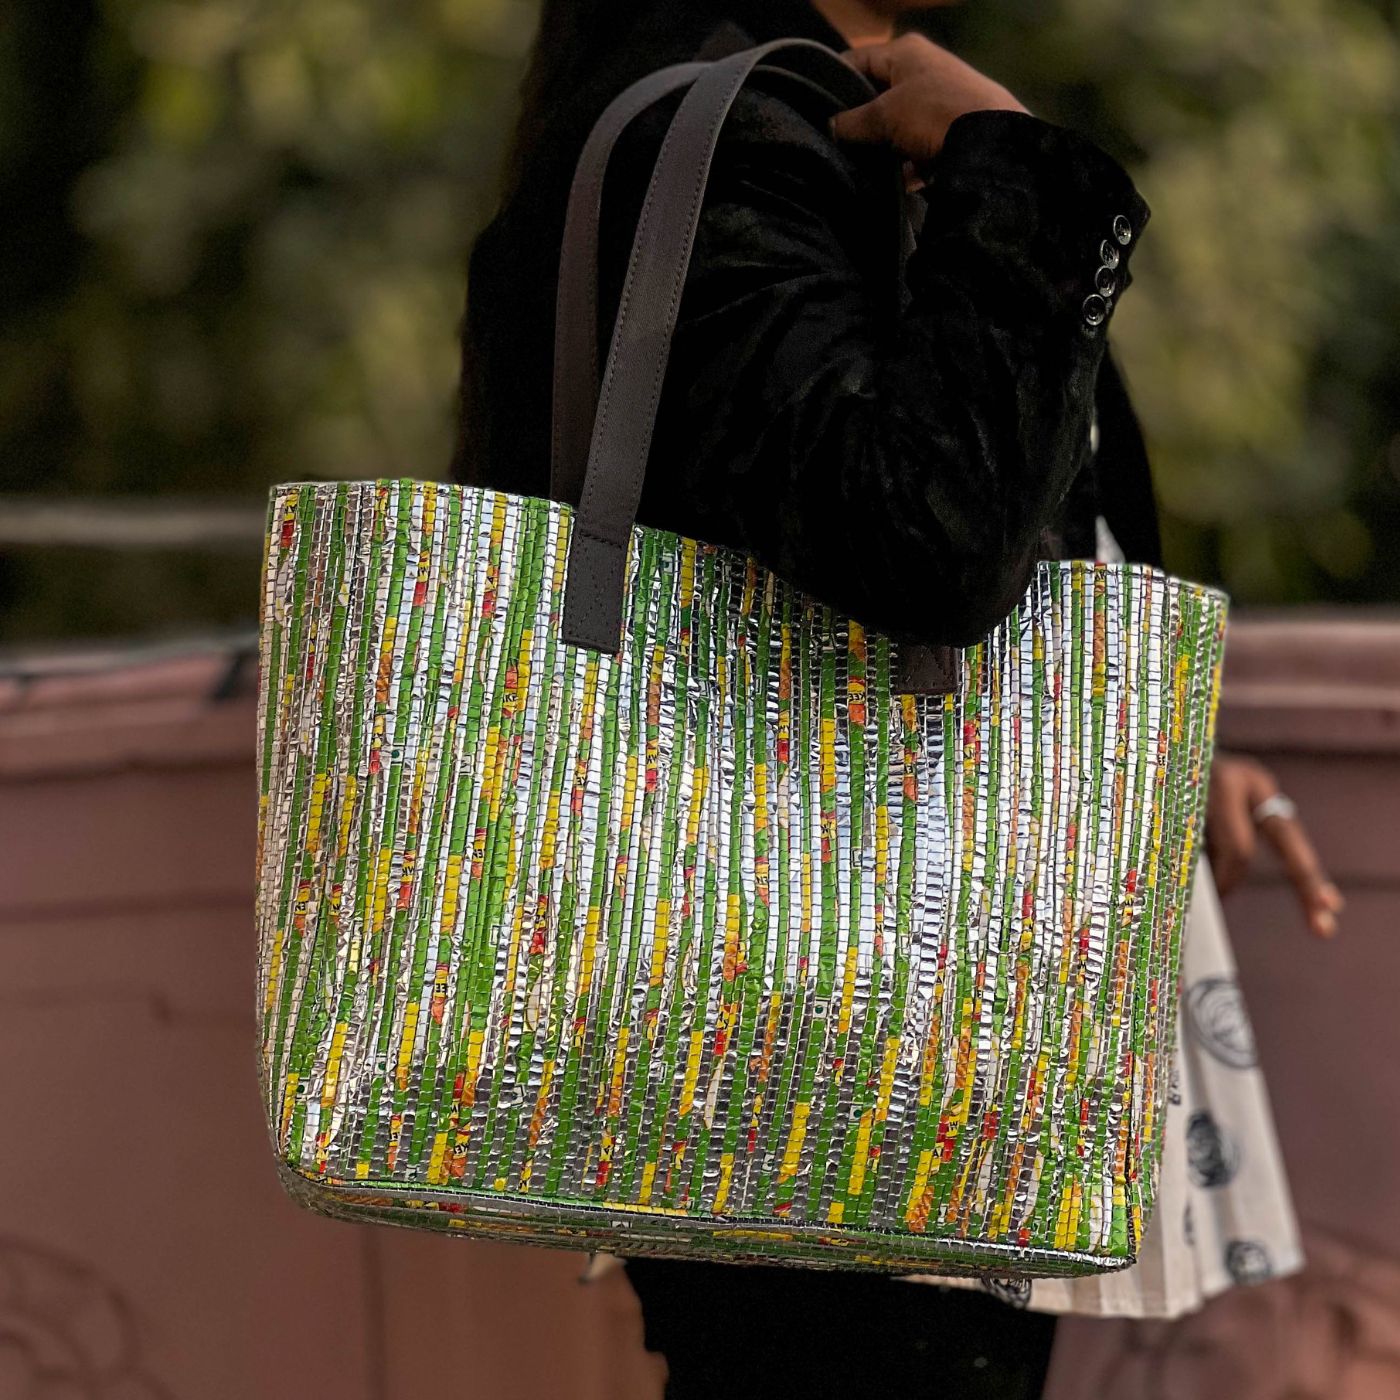 Pune Based Startup Makes Bags From Plastic Waste